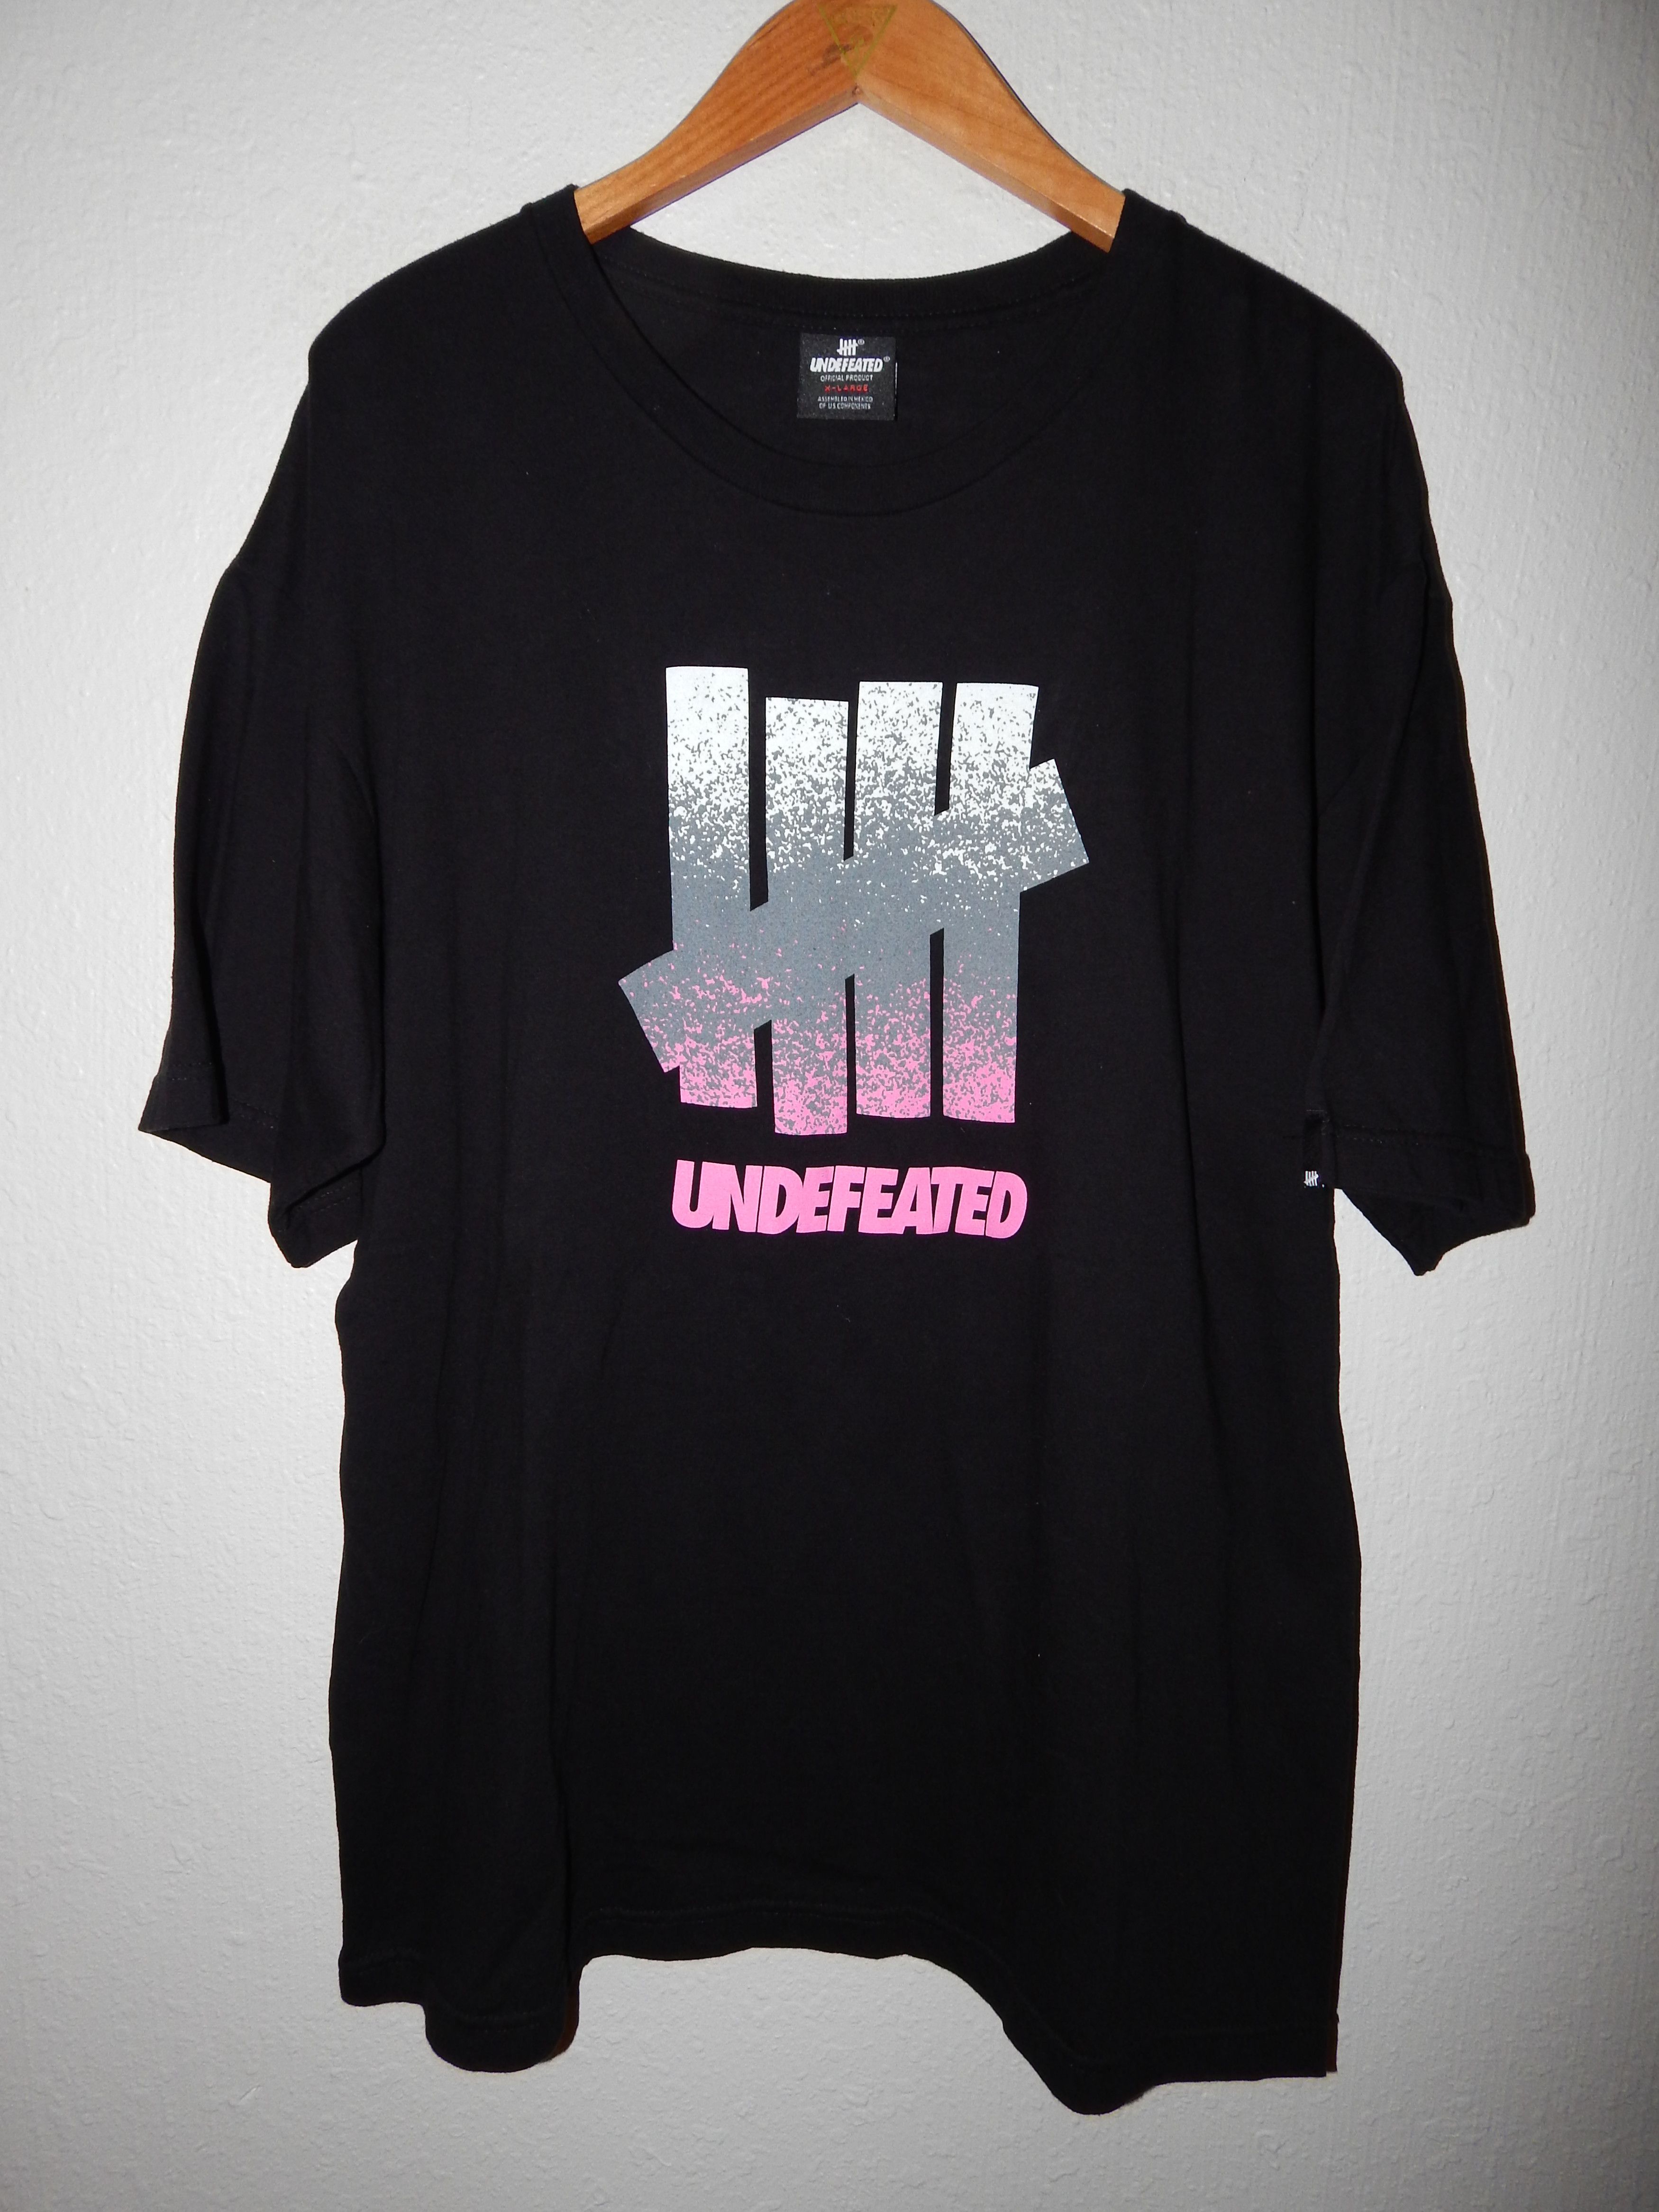 Undefeated Undefeated 5 Strikes Streetwear Big Logo T-shirt Size US XL / EU 56 / 4 - 1 Preview